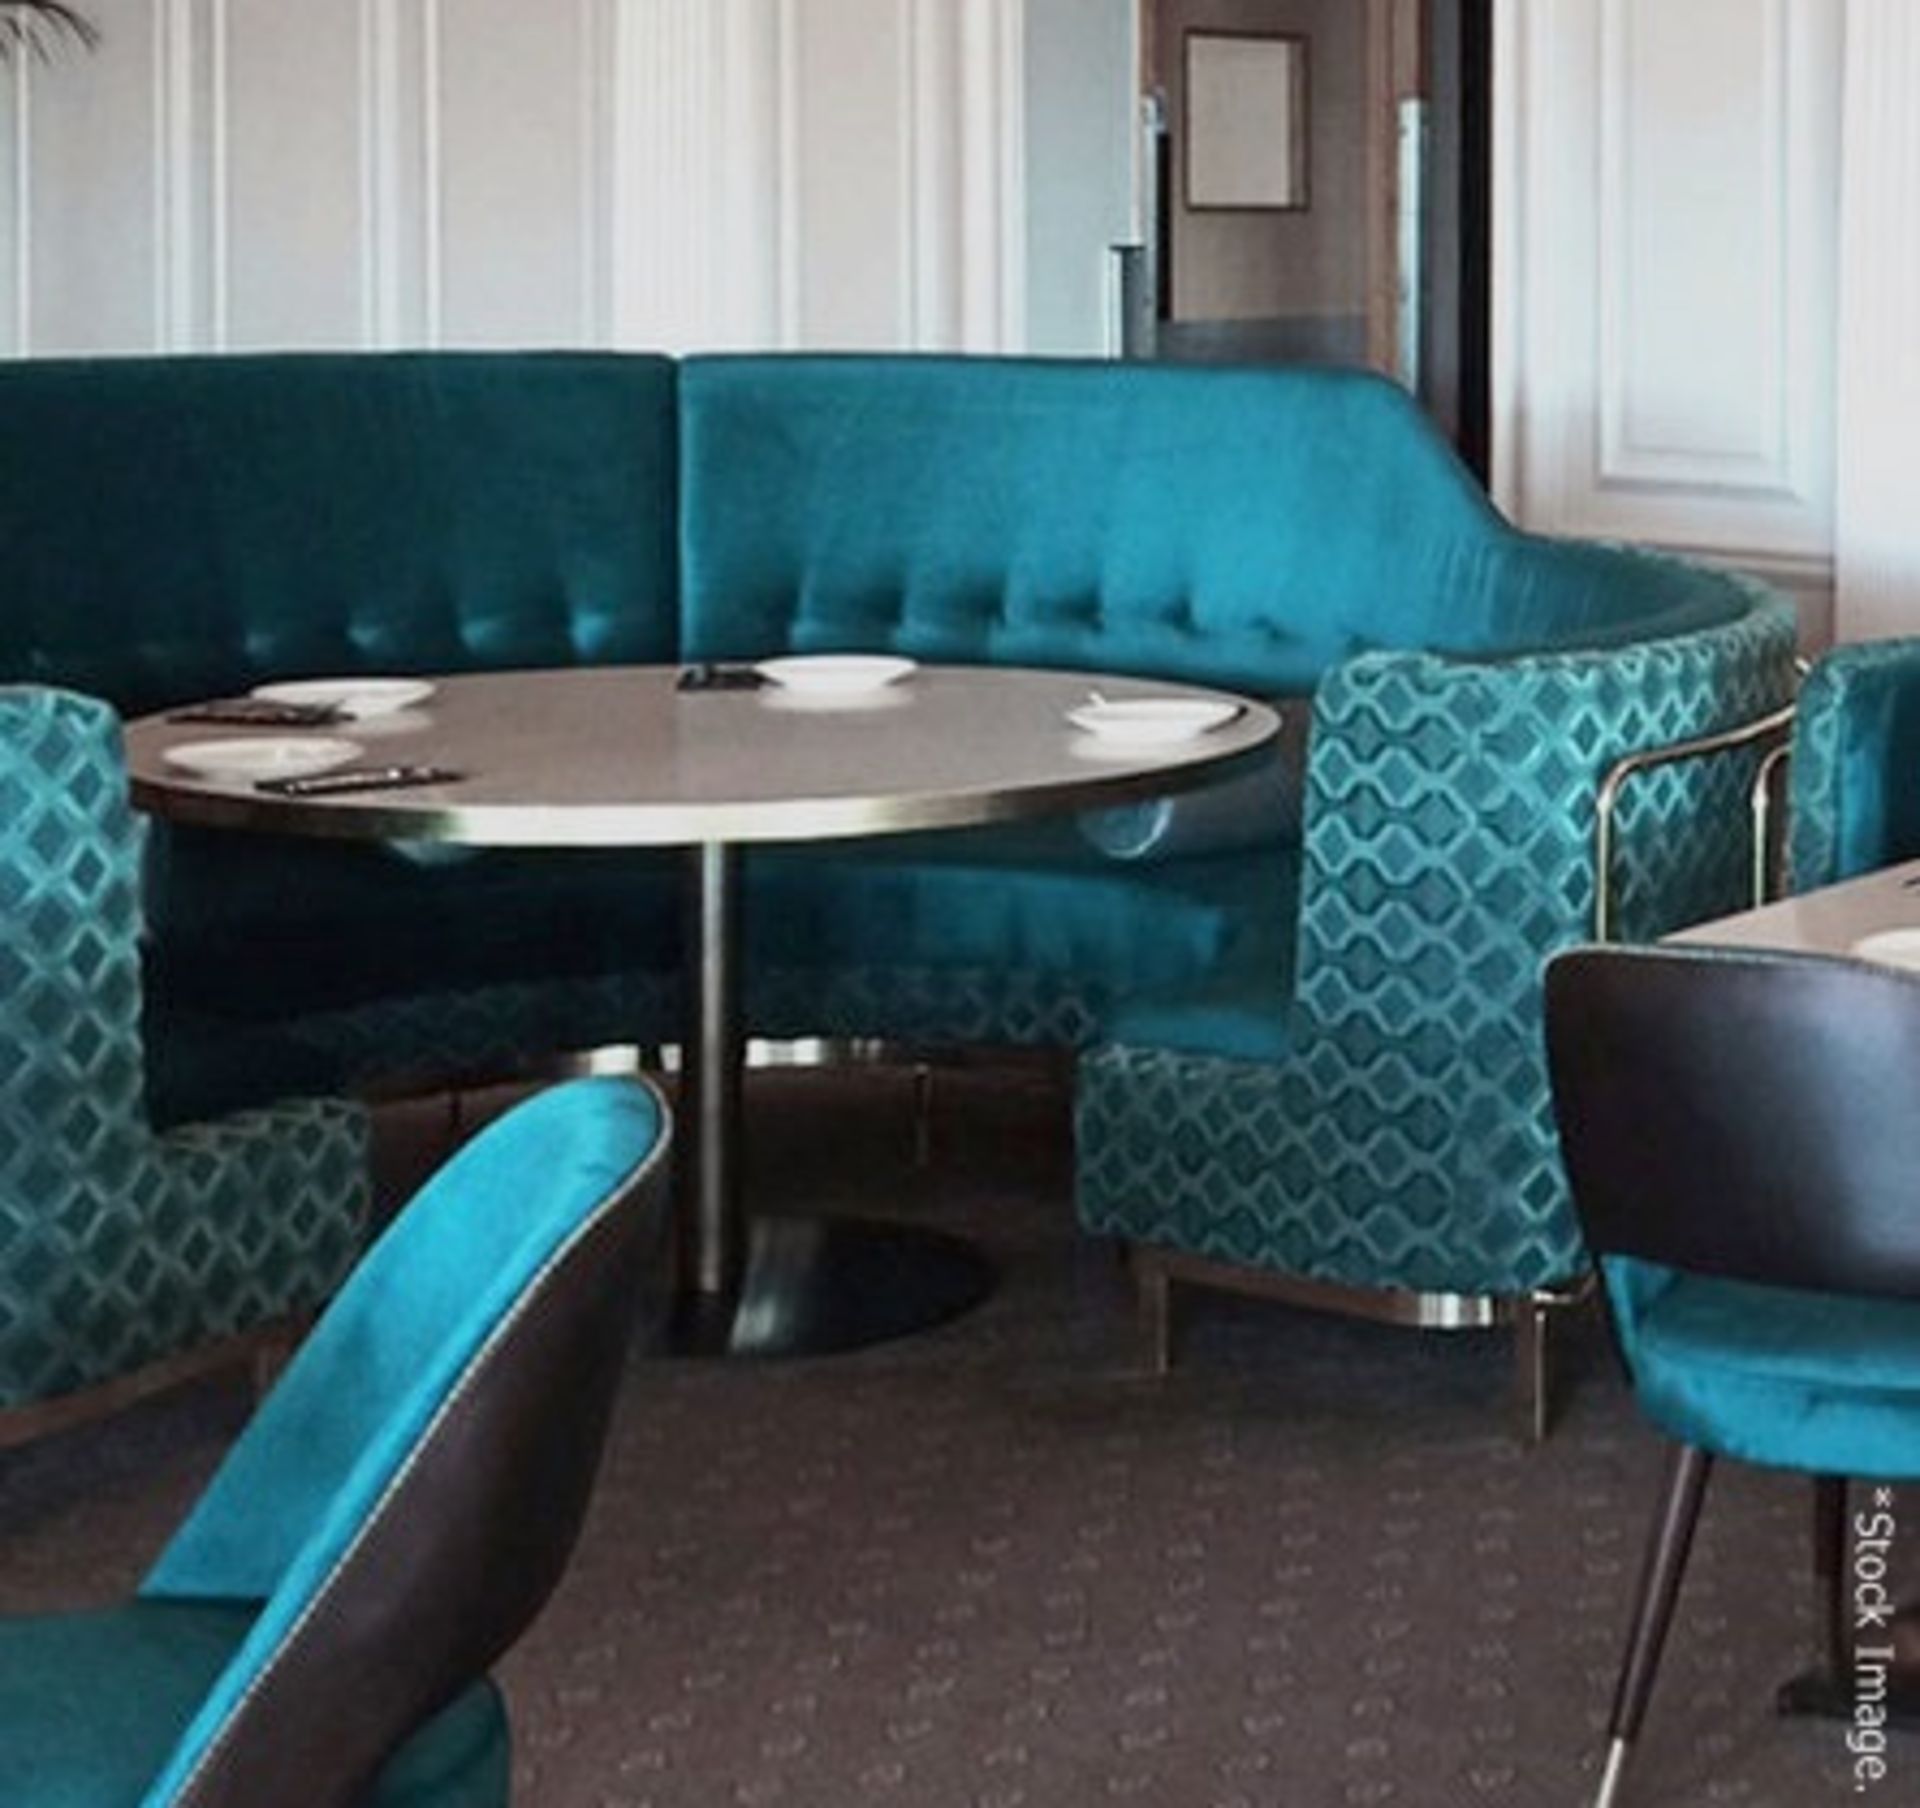 1 x Bespoke Commercial Curved C-Shaped Booth Seating Upholstered In Premium Teal Coloured Fabrics - - Image 2 of 17